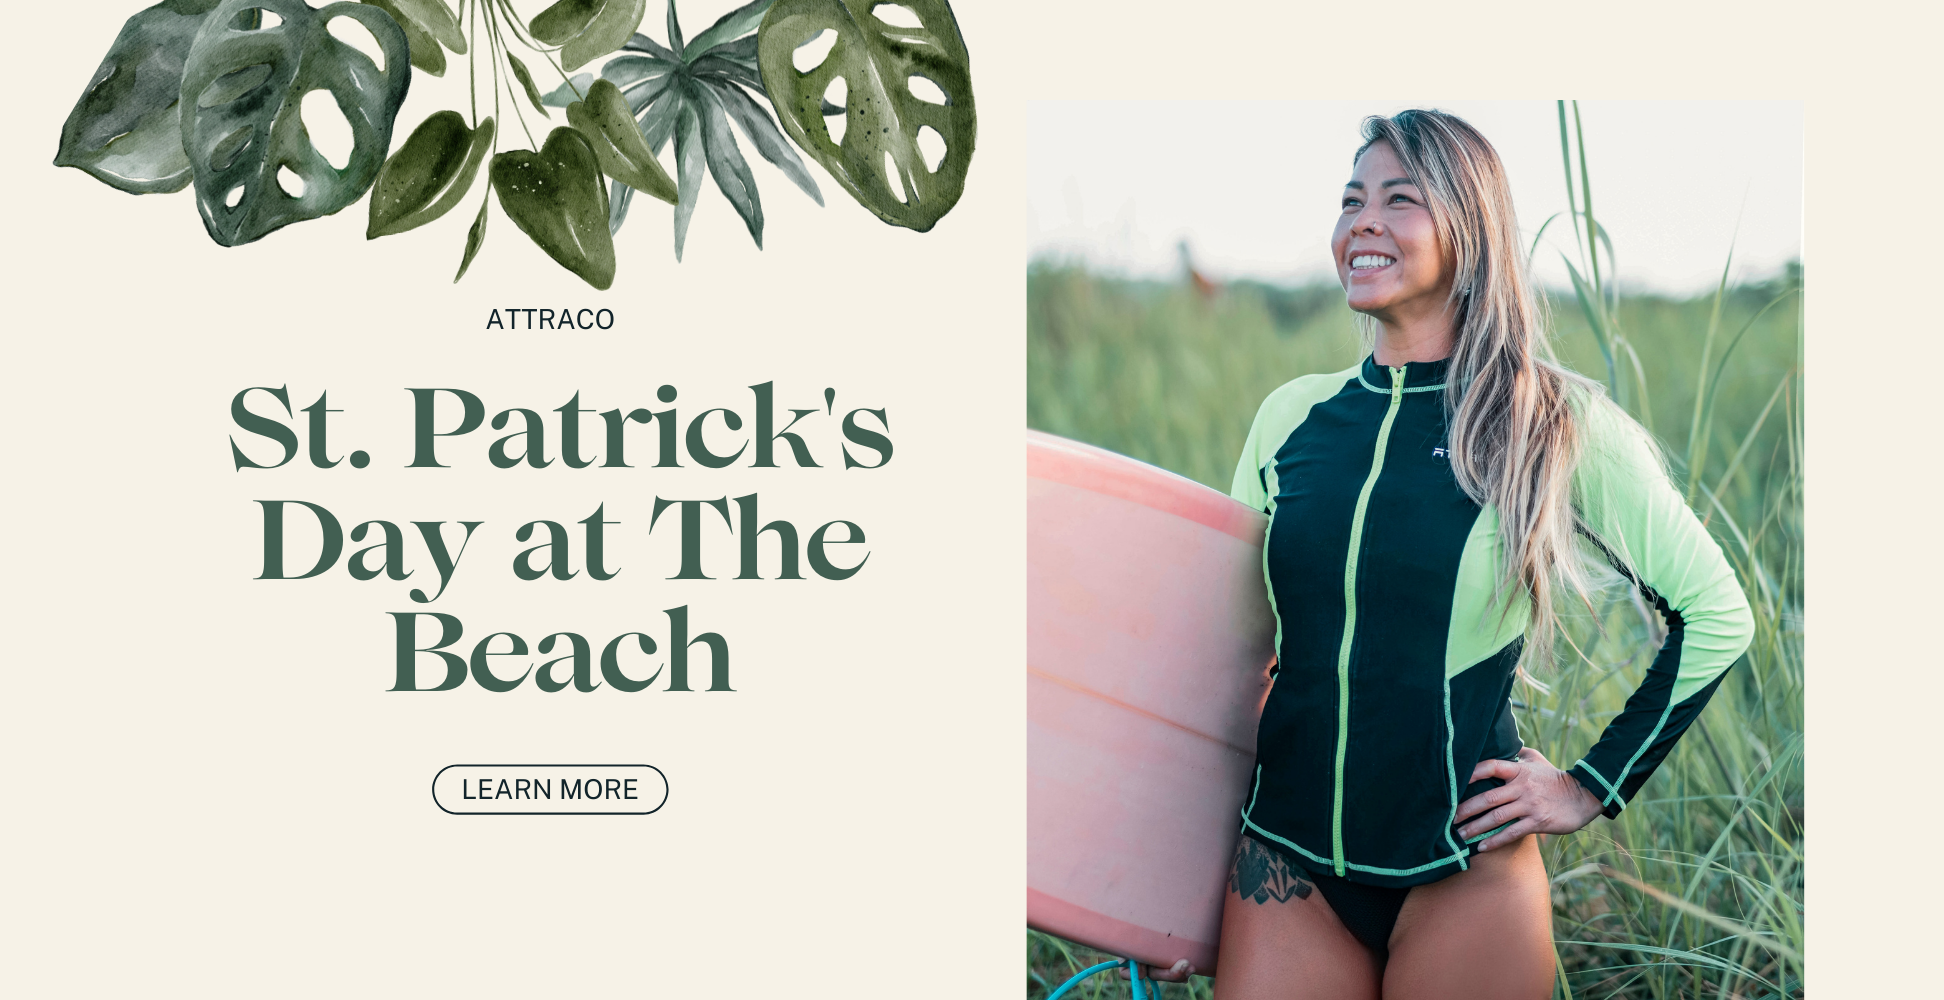 St. Patrick's Day at The Beach: What Should You Wear?